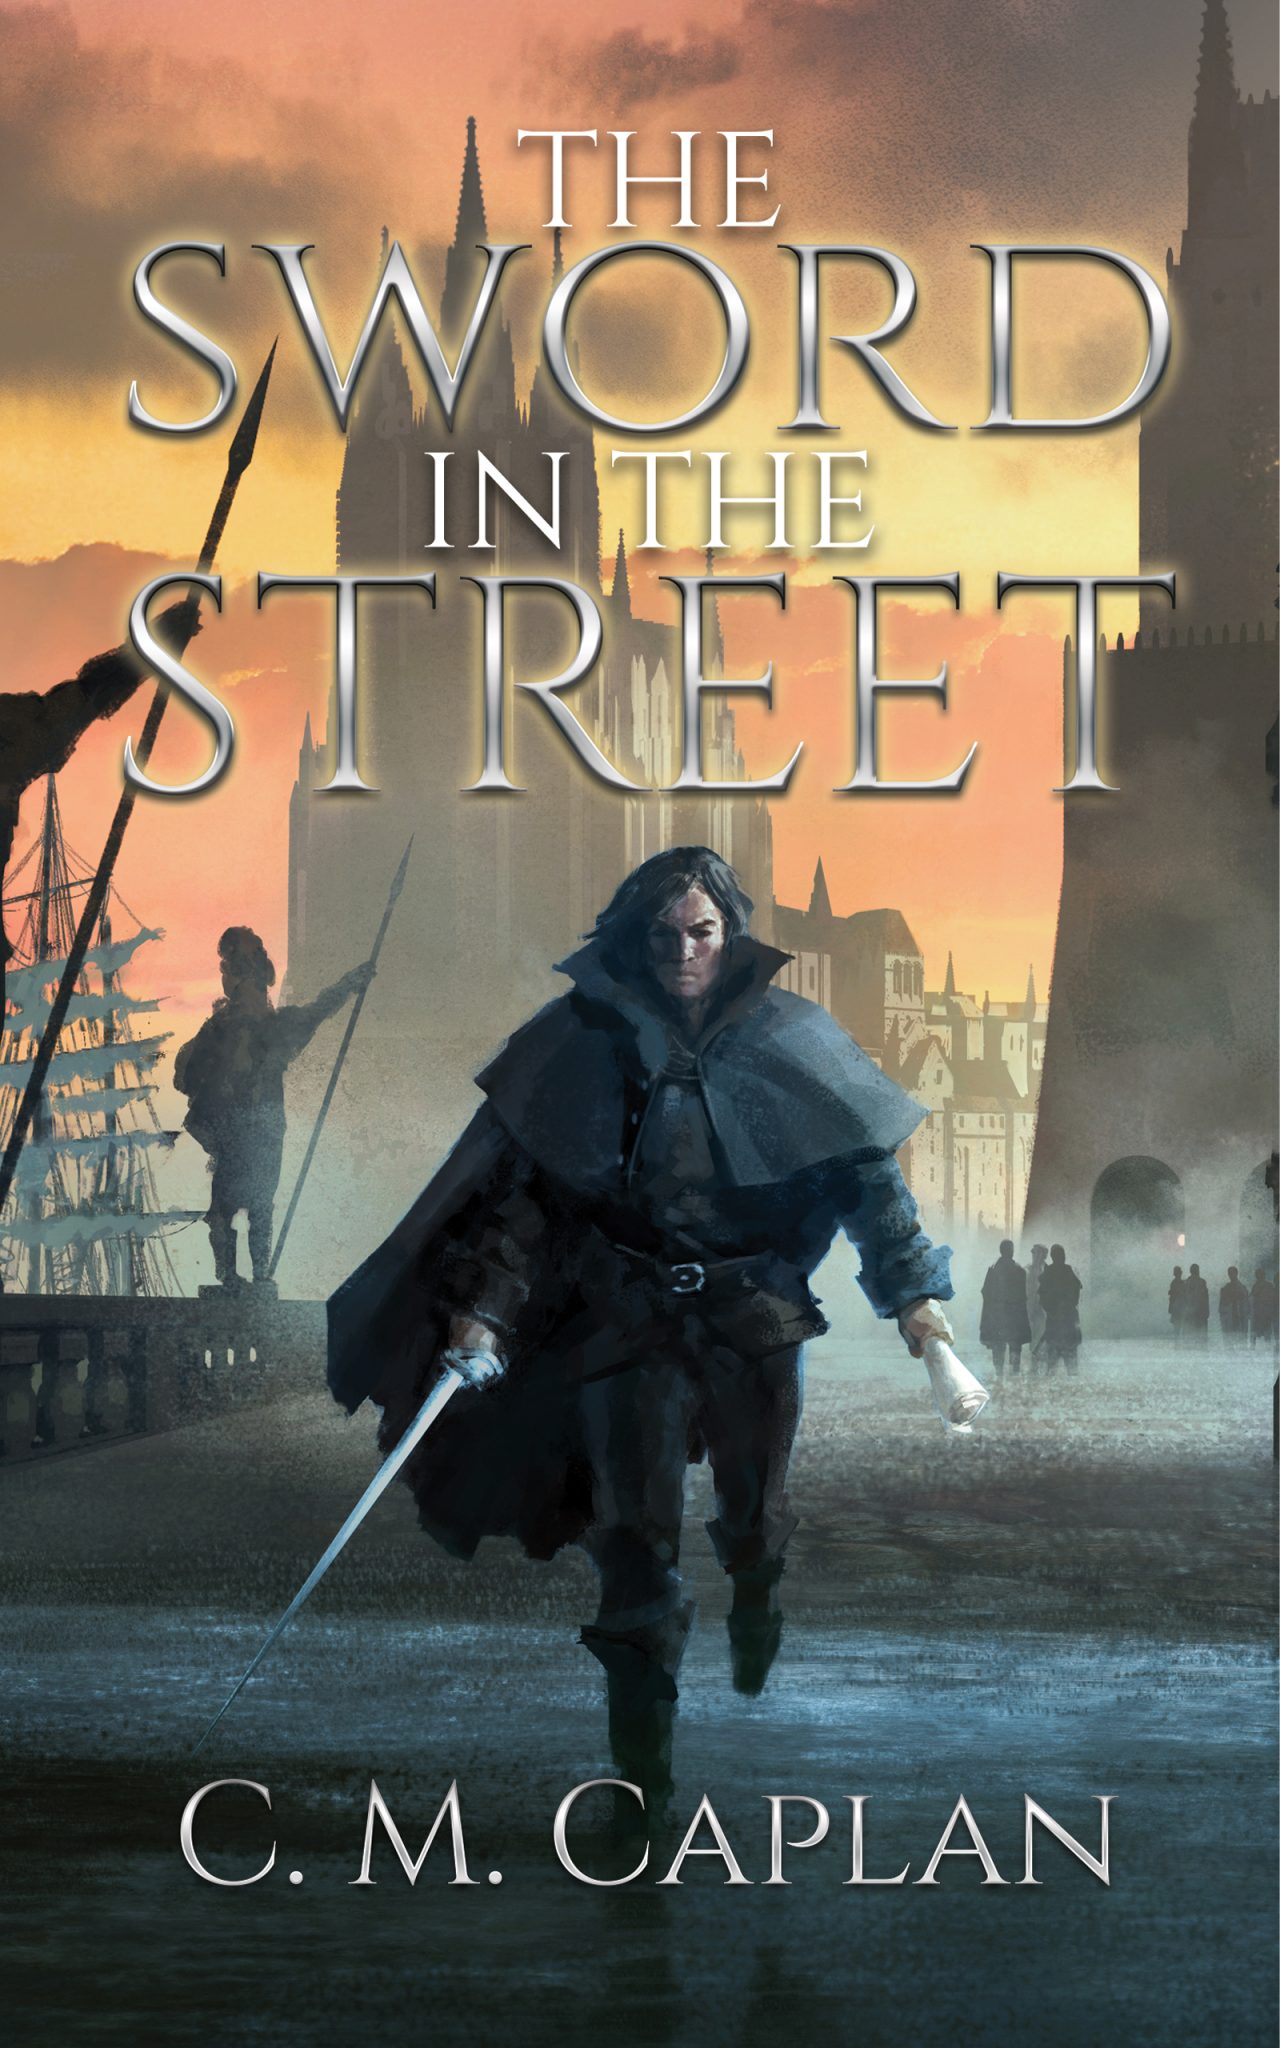 The Sword in the Street by C. M. Caplan